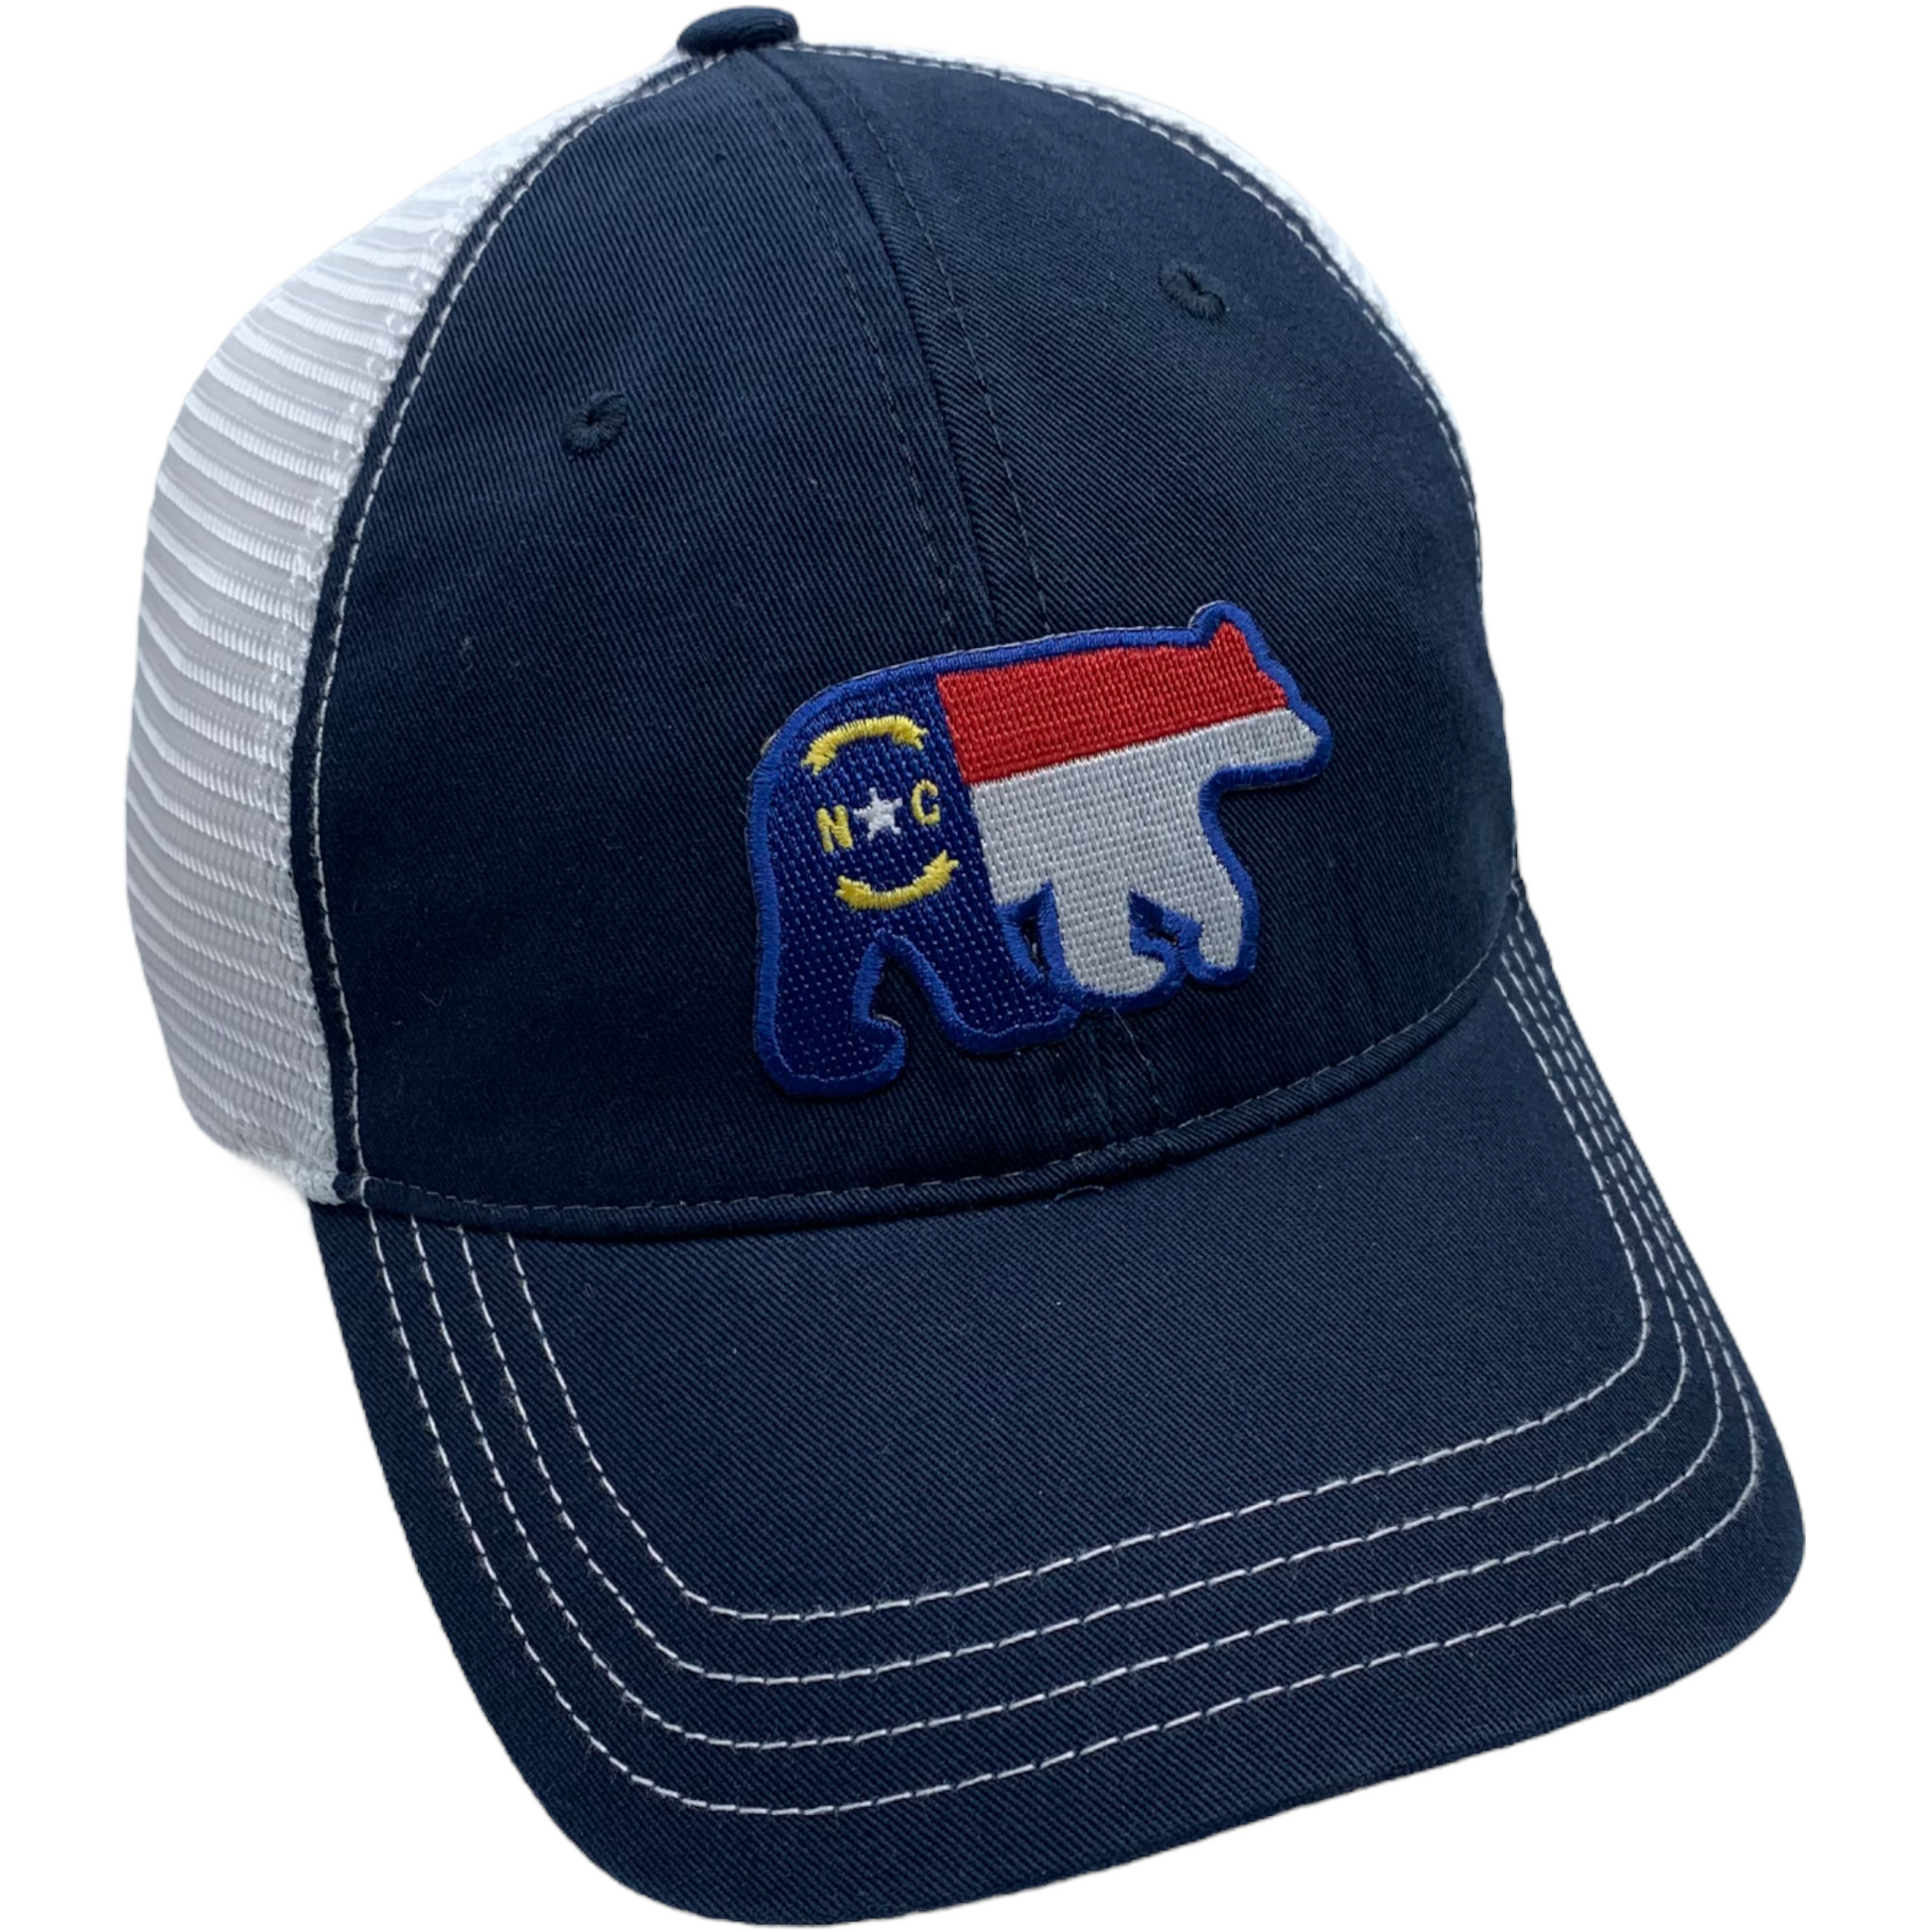 NC Patch Trucker Baseball Navy and White - The ASHEVILLE Co. TM